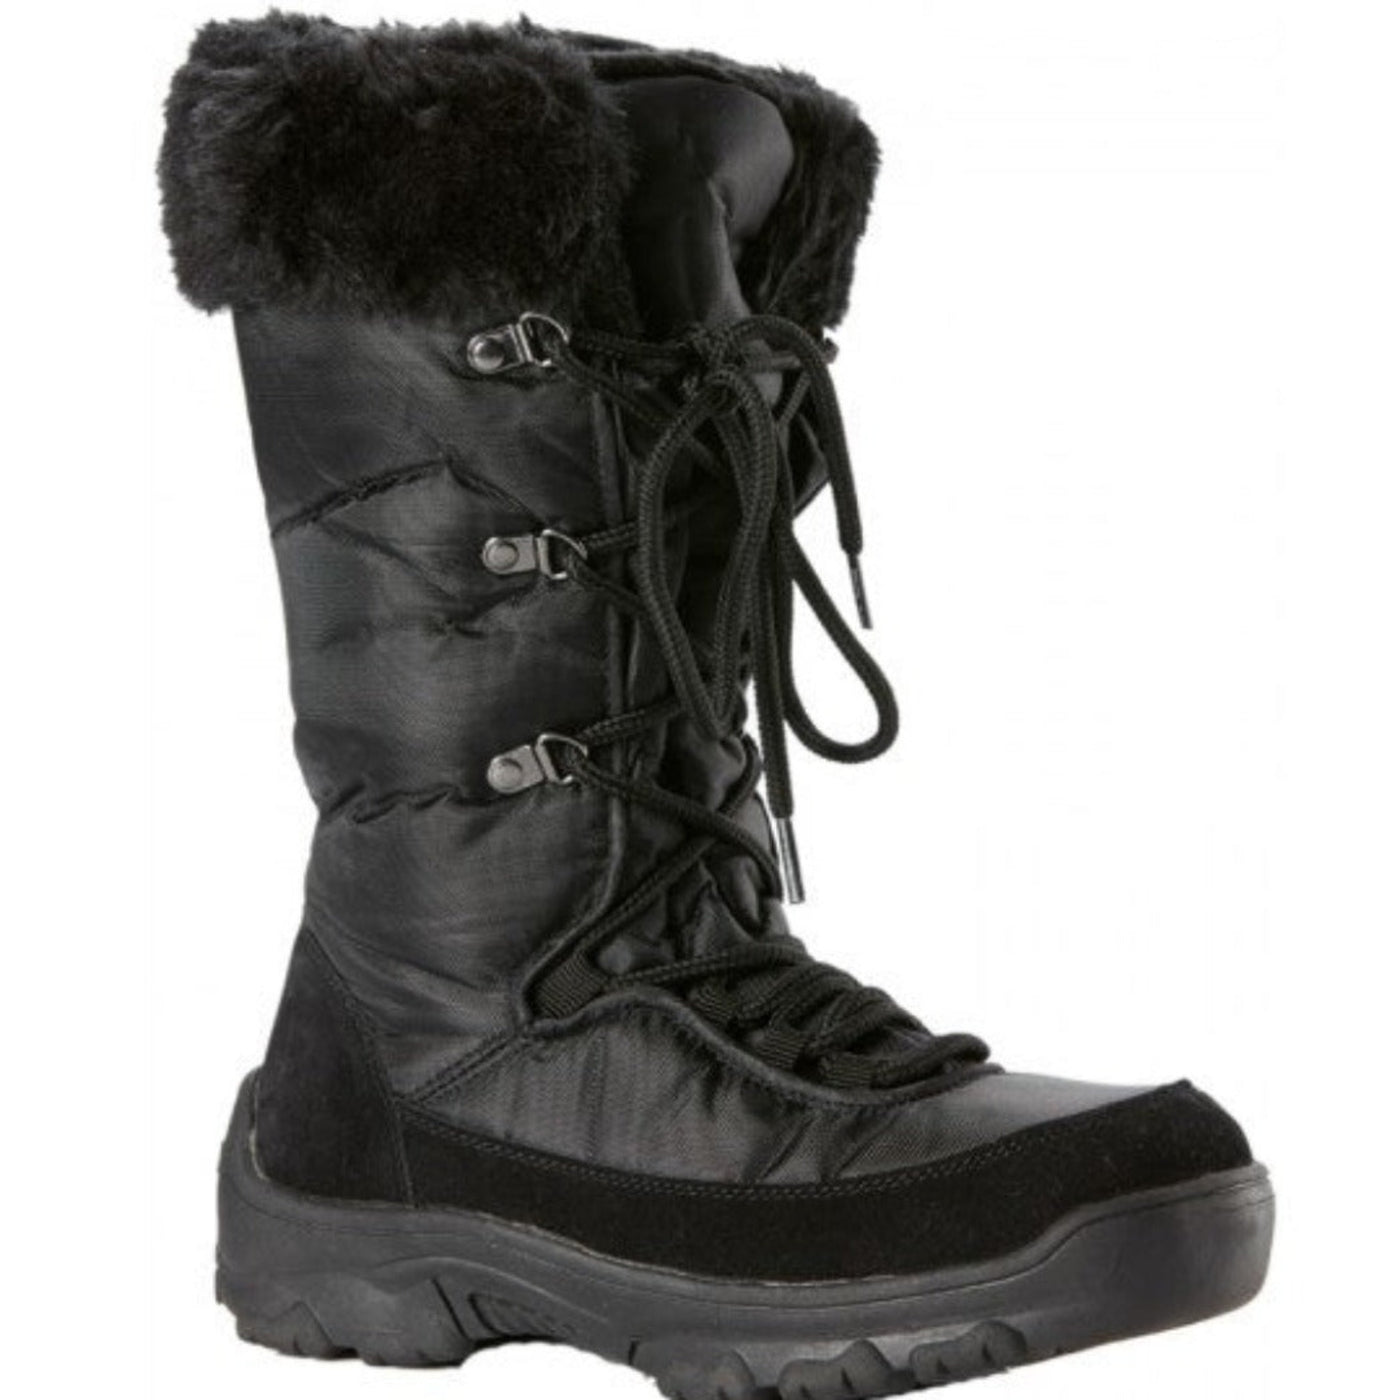 Rojo Women's Out of Bounds Snow Boots - Black